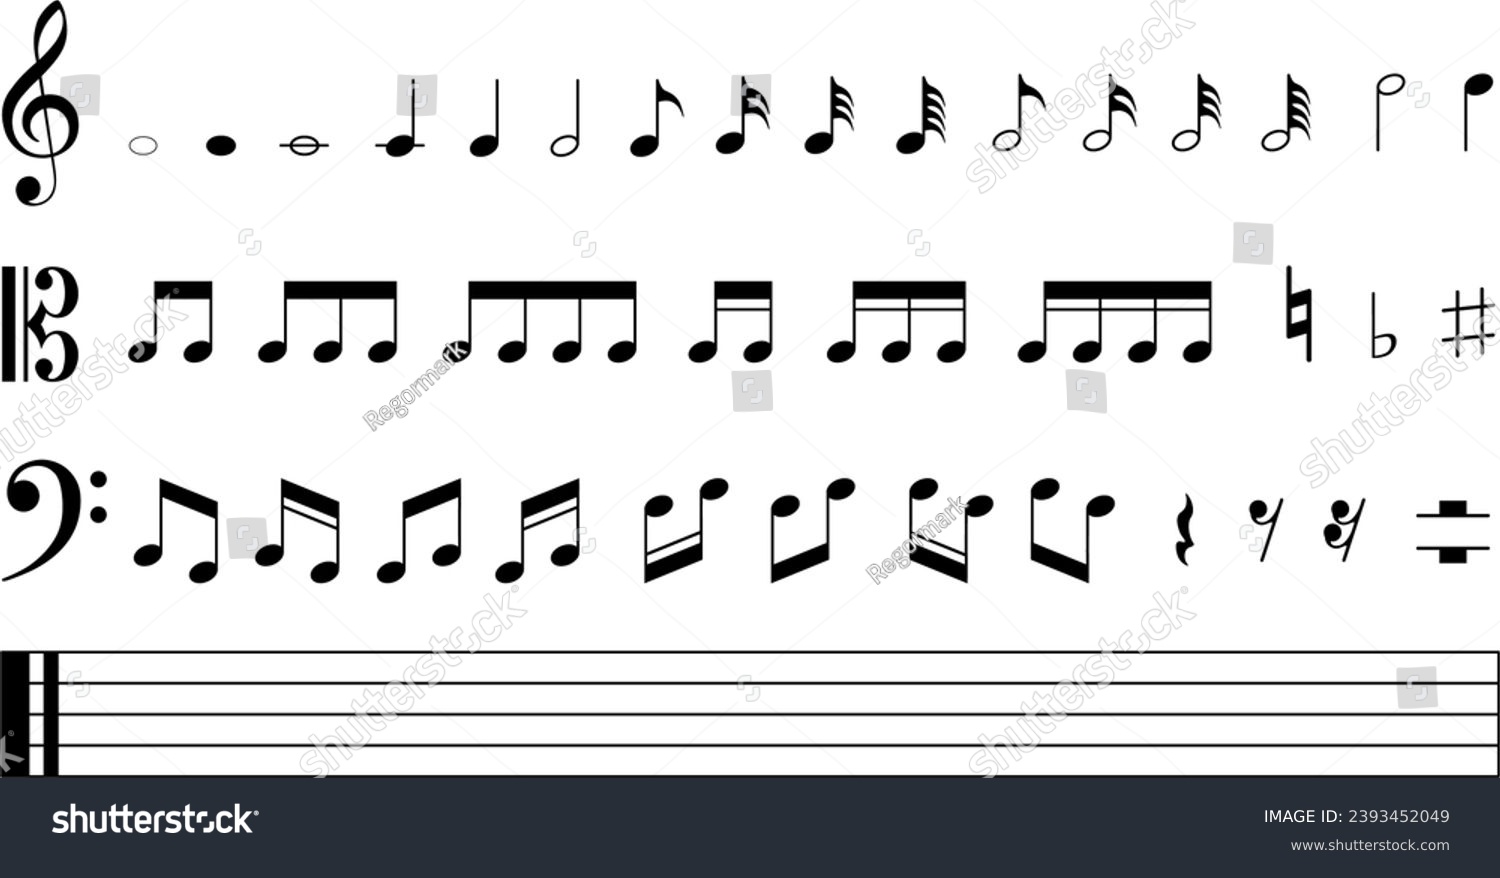 SVG of Vector with symbols and musical notes svg